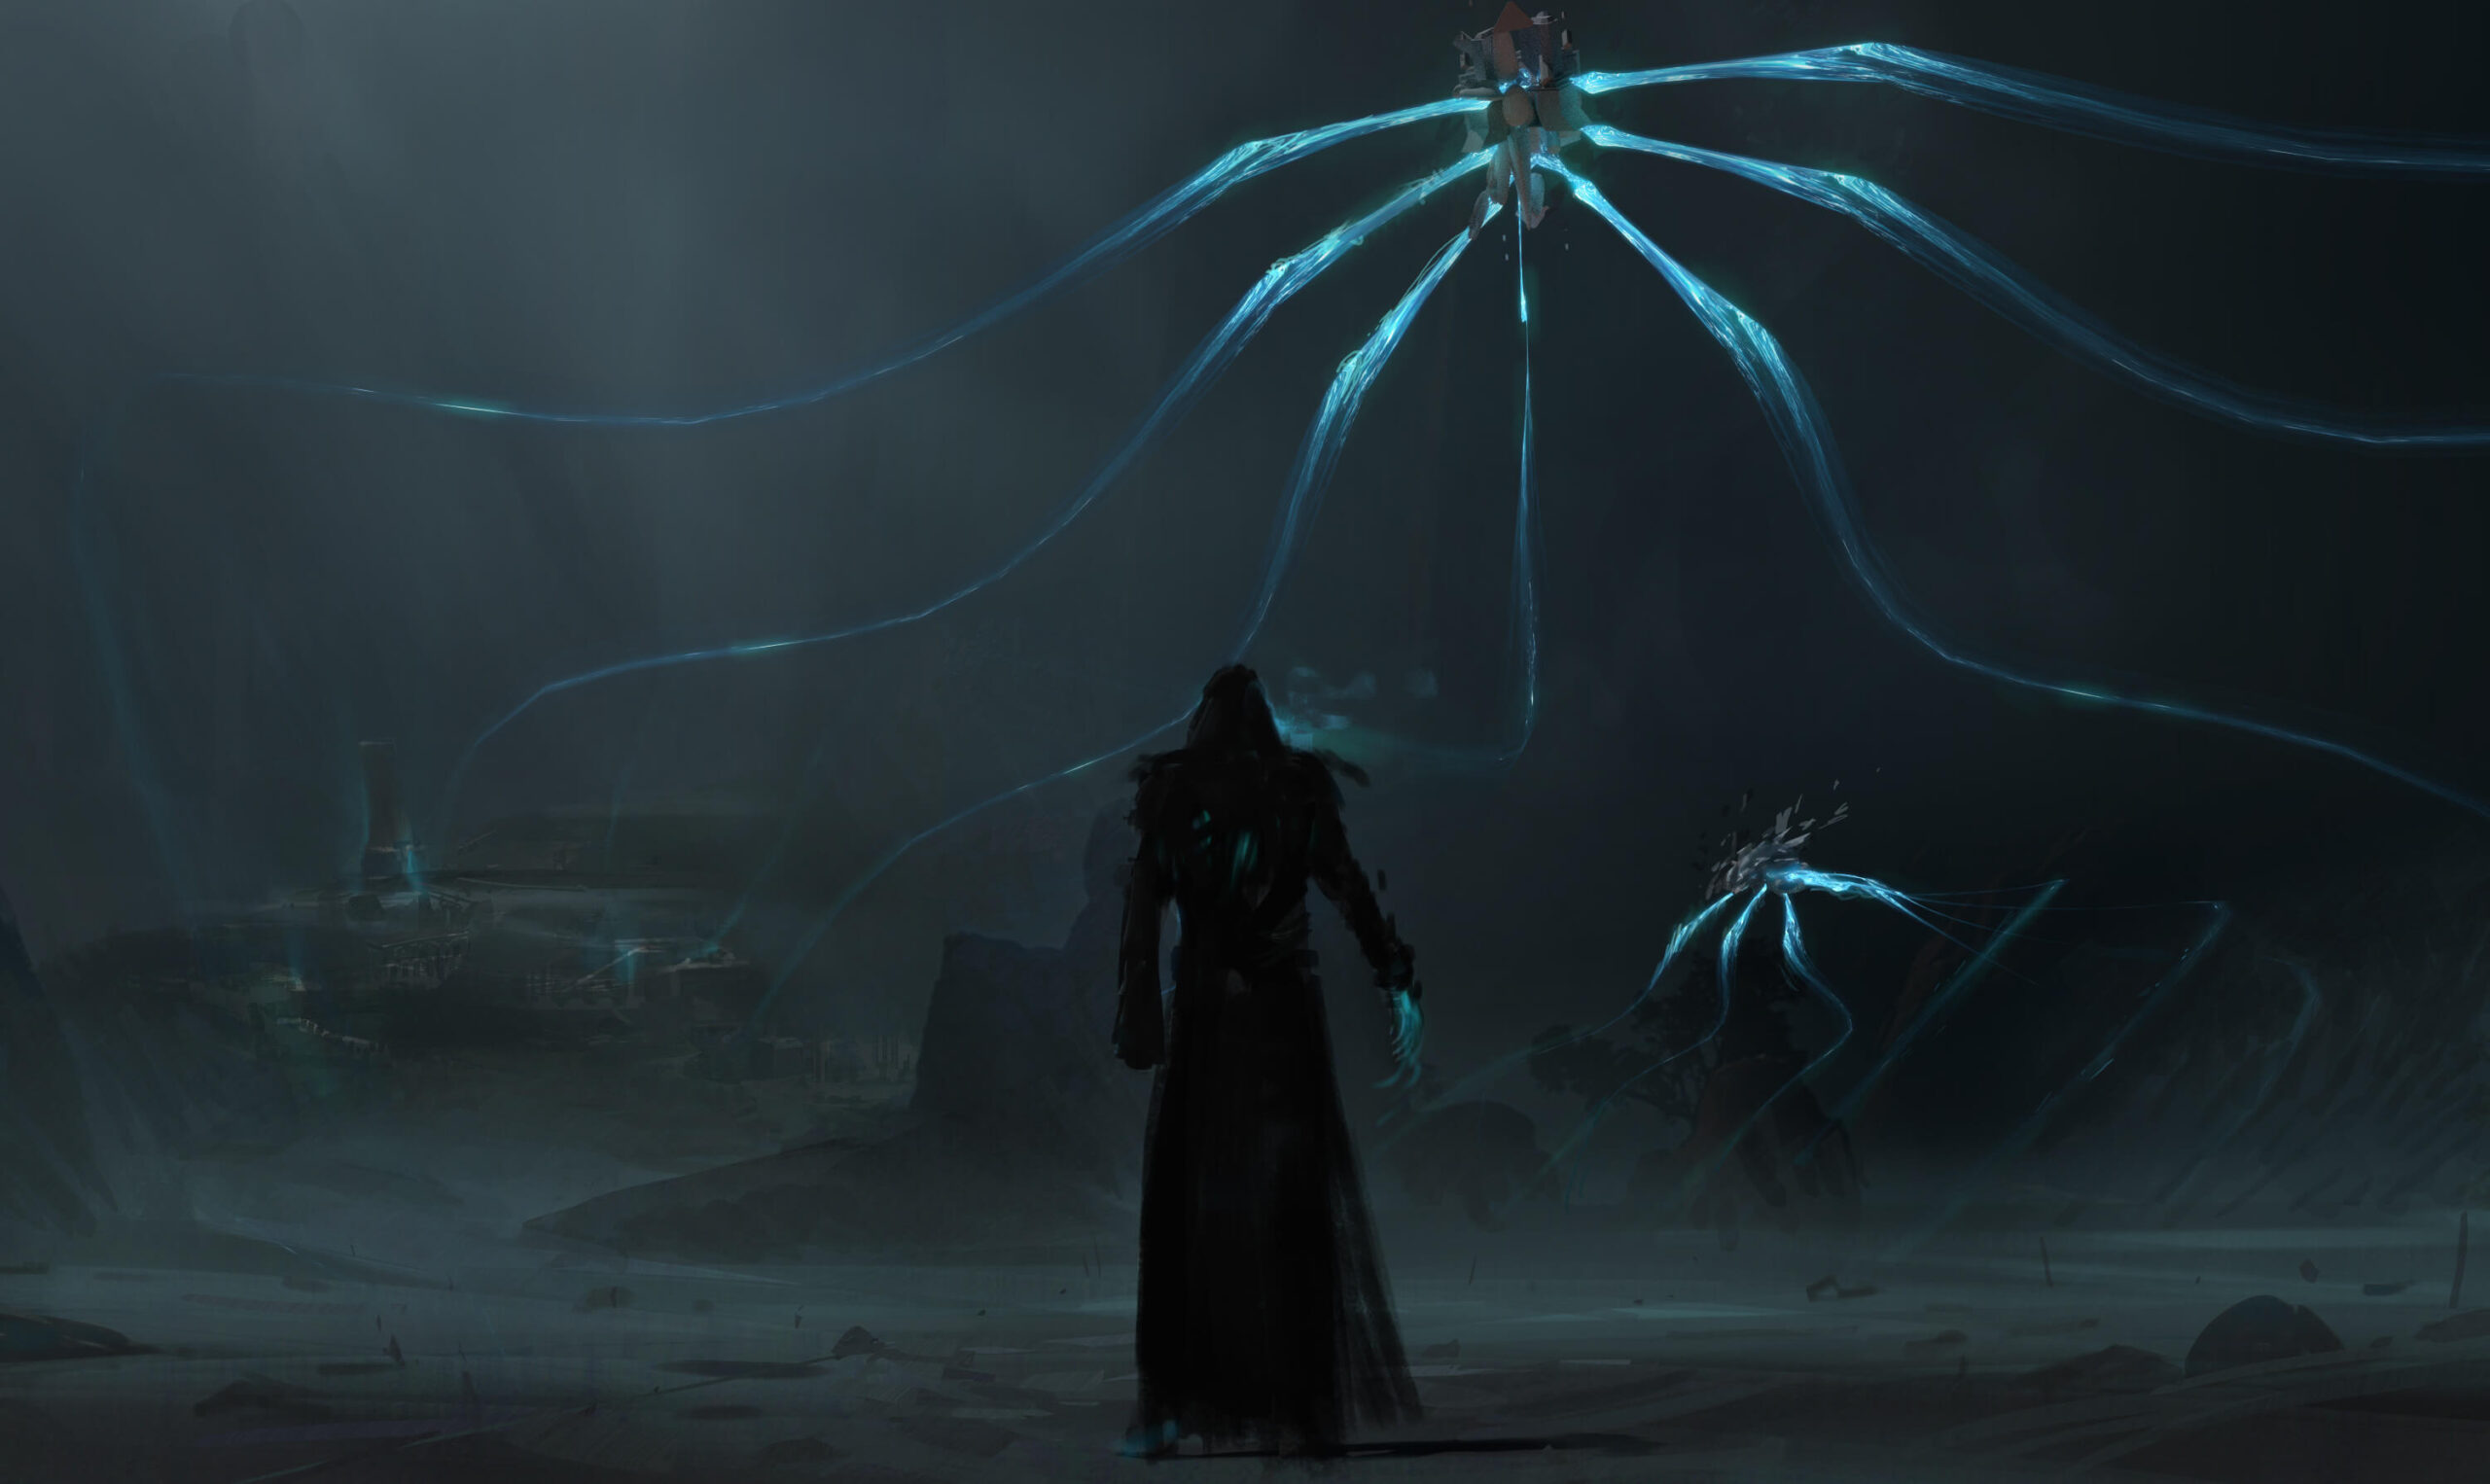 Undead spider like specters seem to have an affect on the nearby area with their dark arcane magic